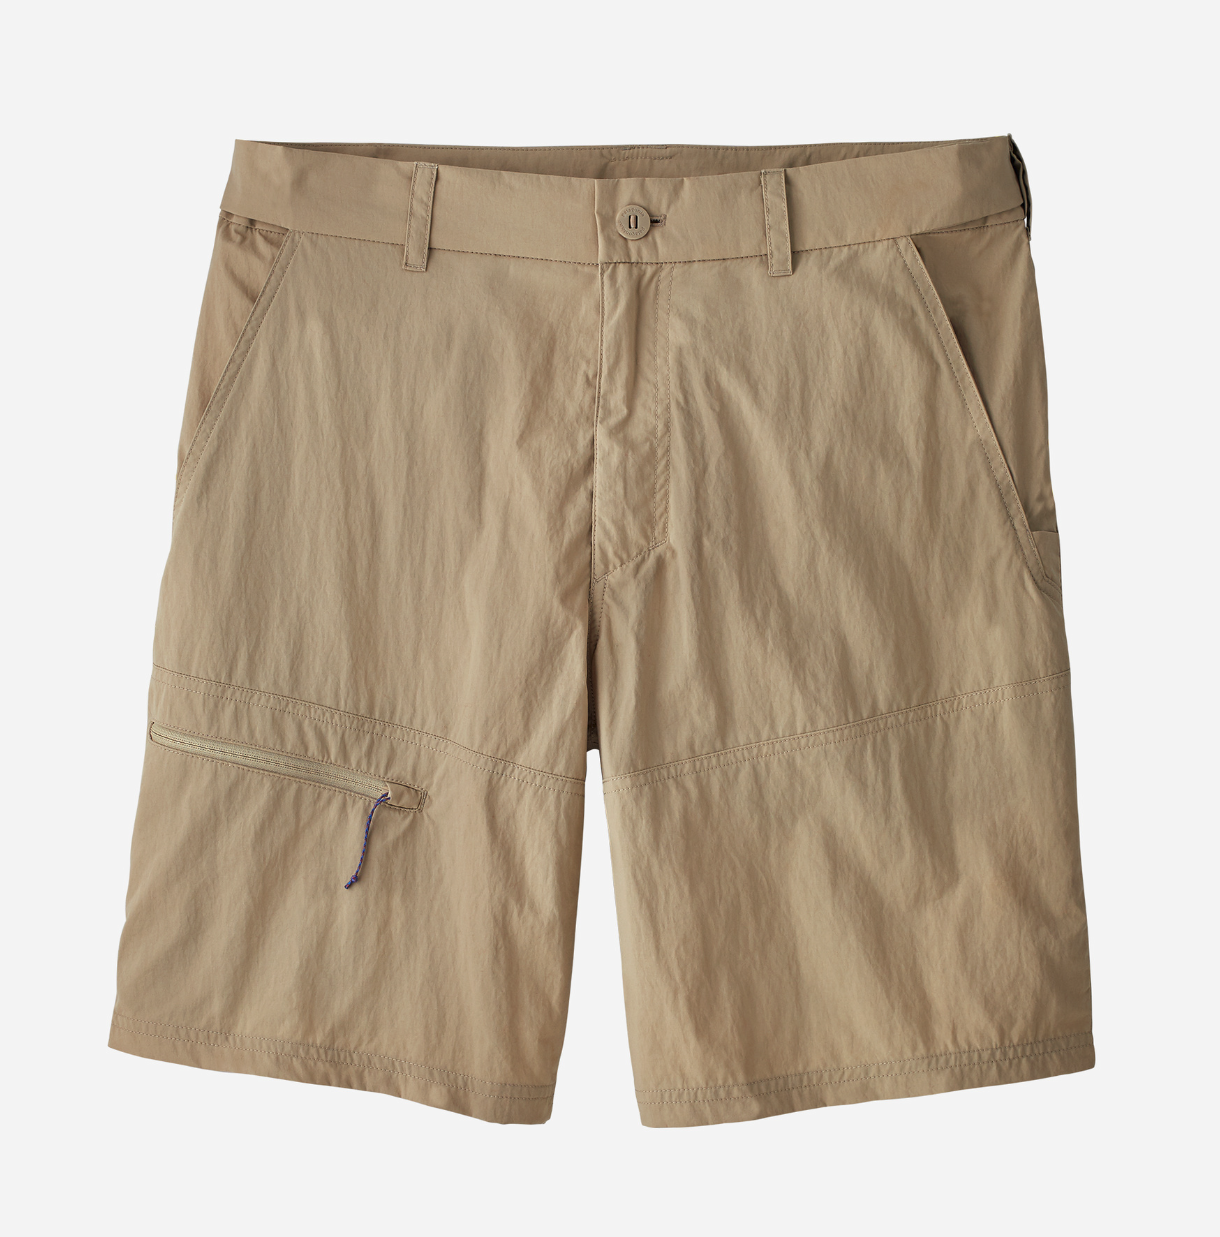 https://www.theflyfishers.com/Content/files/Patagonia/SandyCayShorts82127/ELKH.png